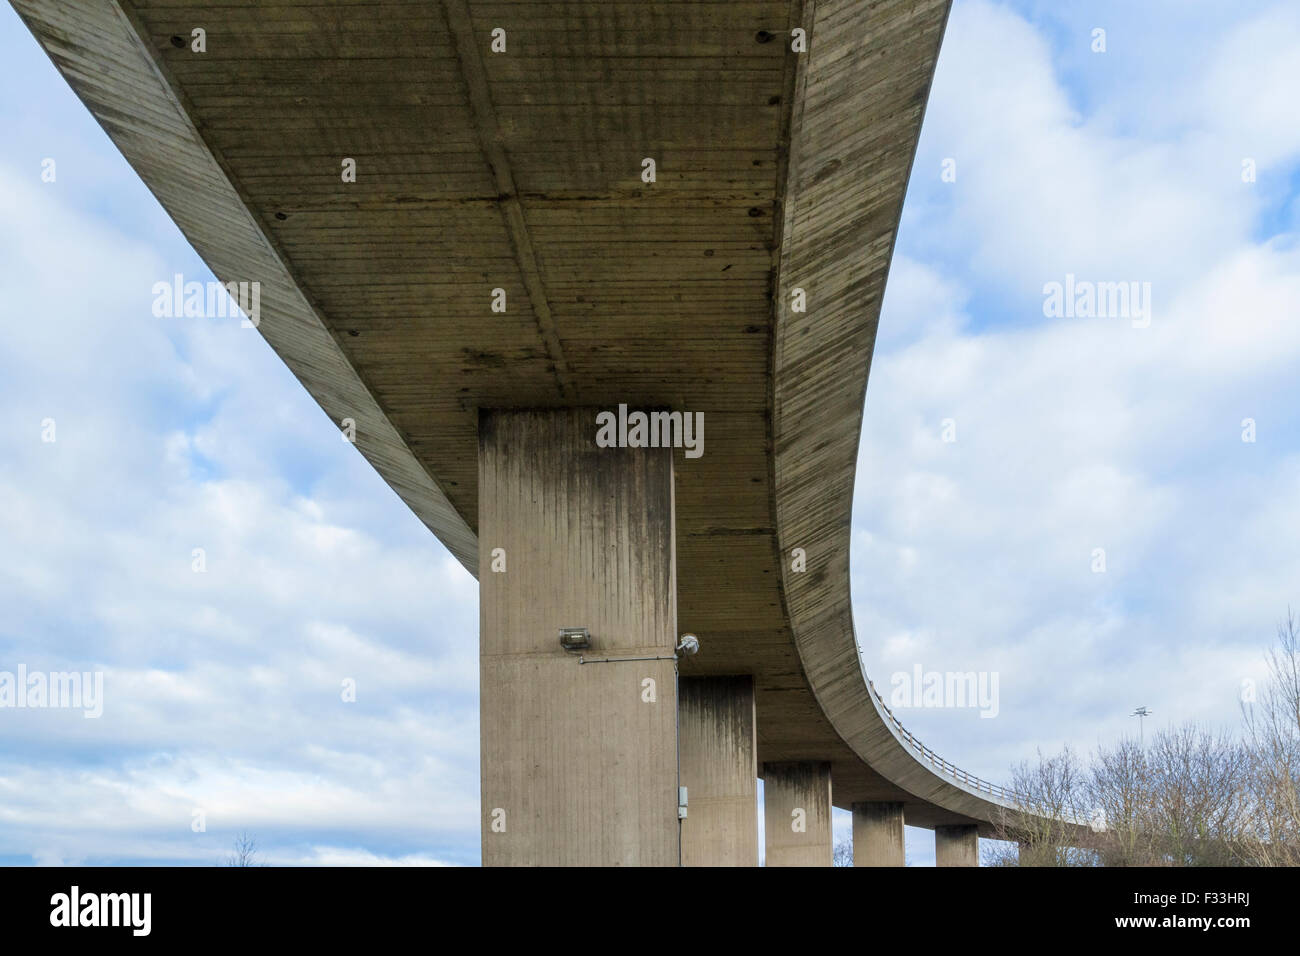 Concrete flyover or overpass. Below an overhead section of a road bridge, Nottingham, England, UK Stock Photo